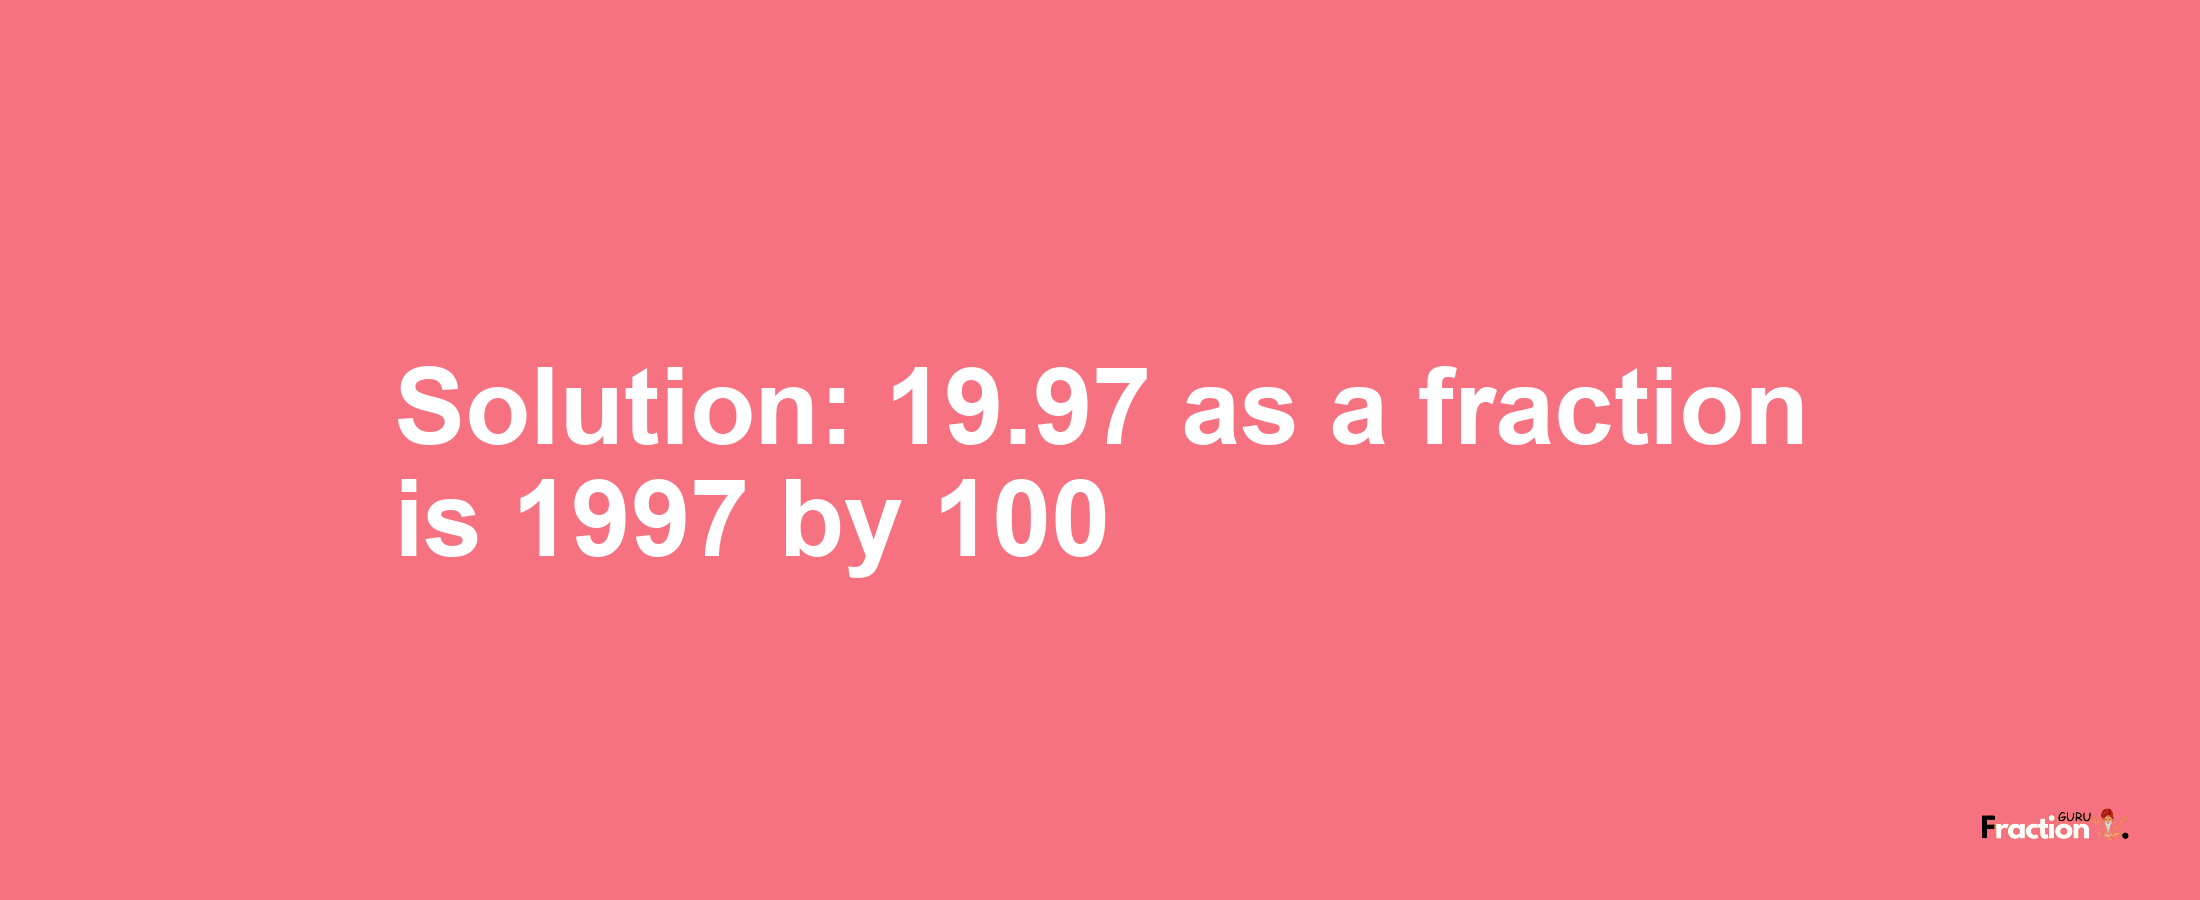 Solution:19.97 as a fraction is 1997/100